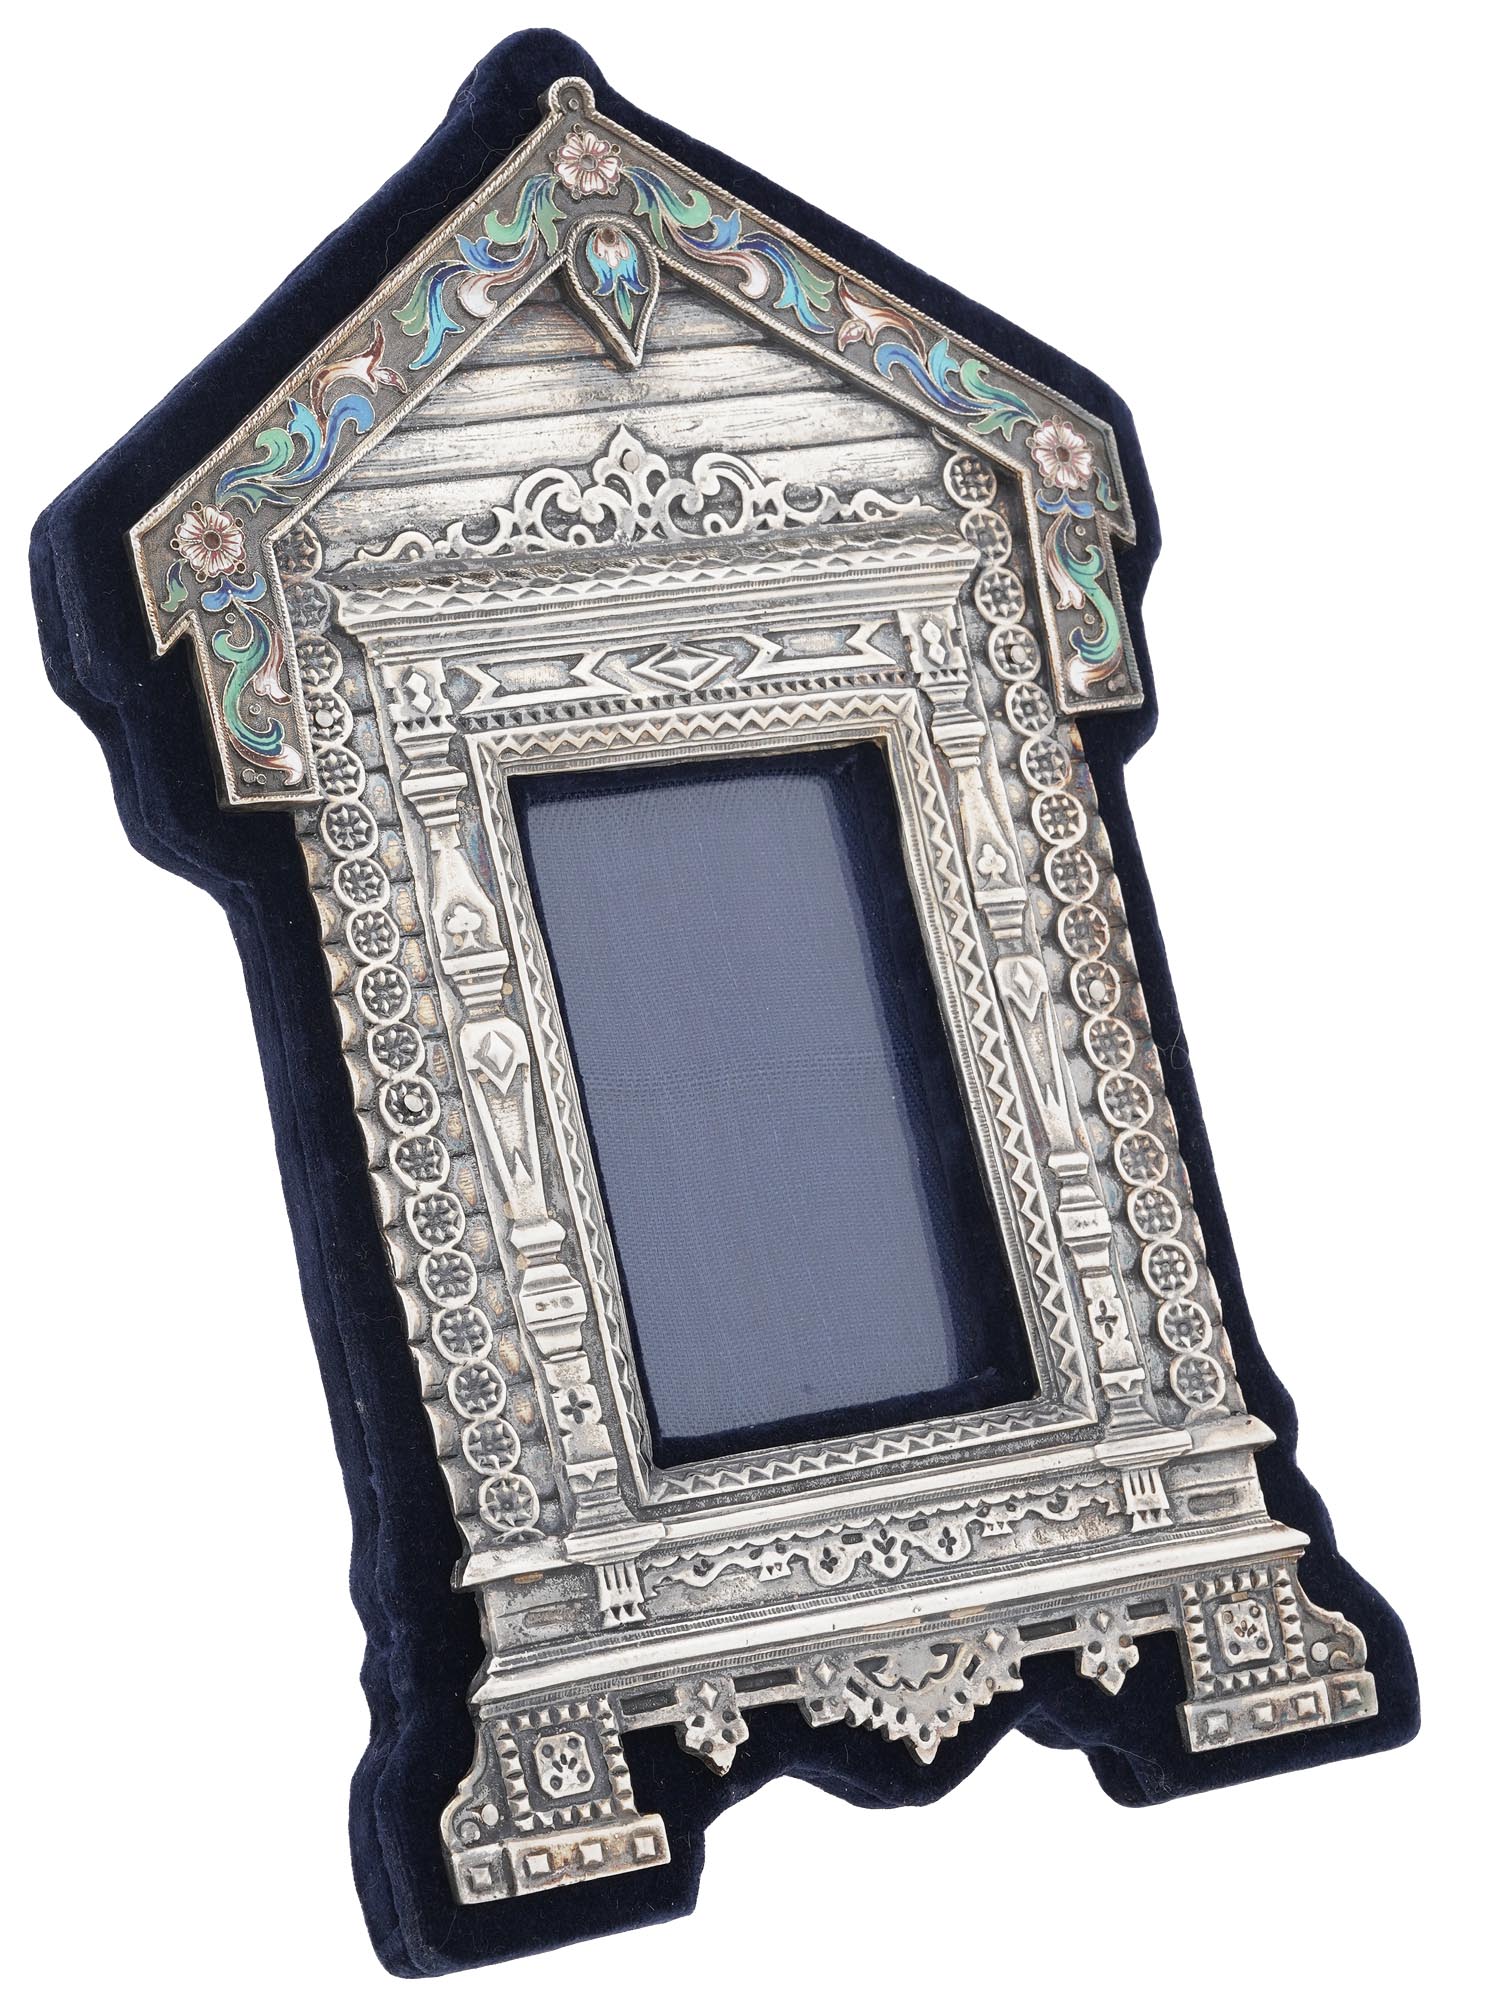 RUSSIAN SILVER AND CLOISONNE ENAMEL PICTURE FRAME PIC-0